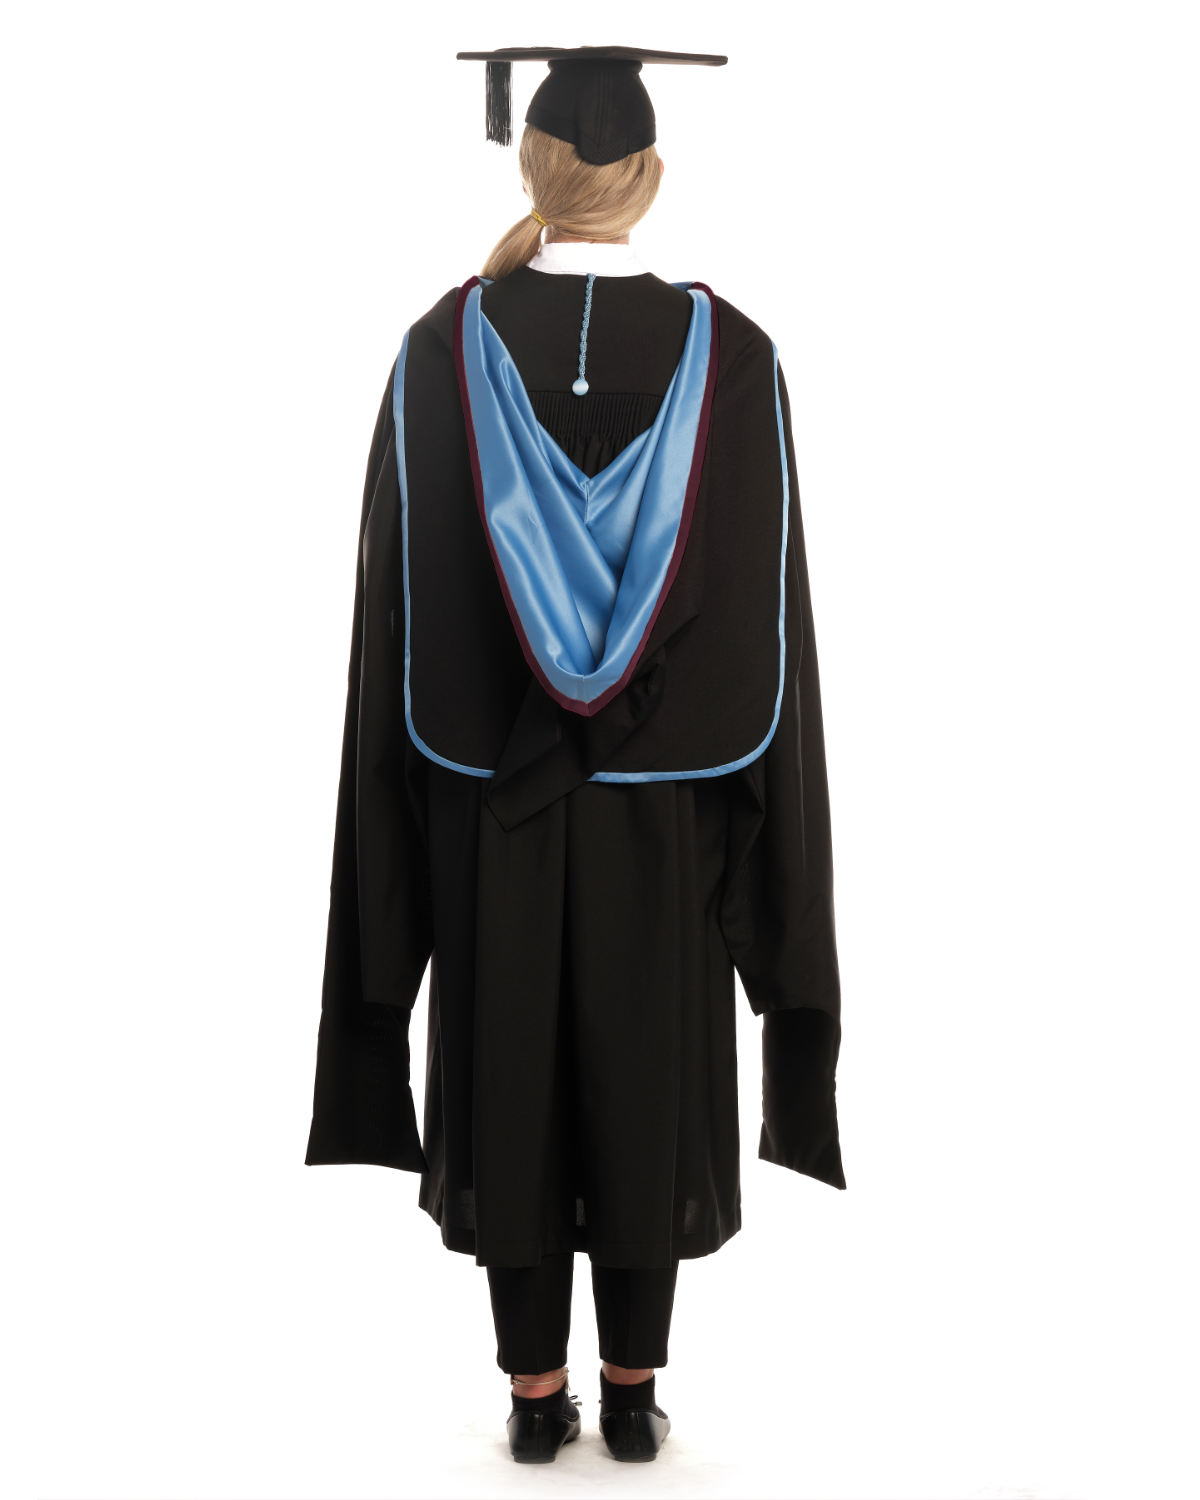 University of Southampton | MPhil | Master of Philosophy Gown, Cap and Hood Set